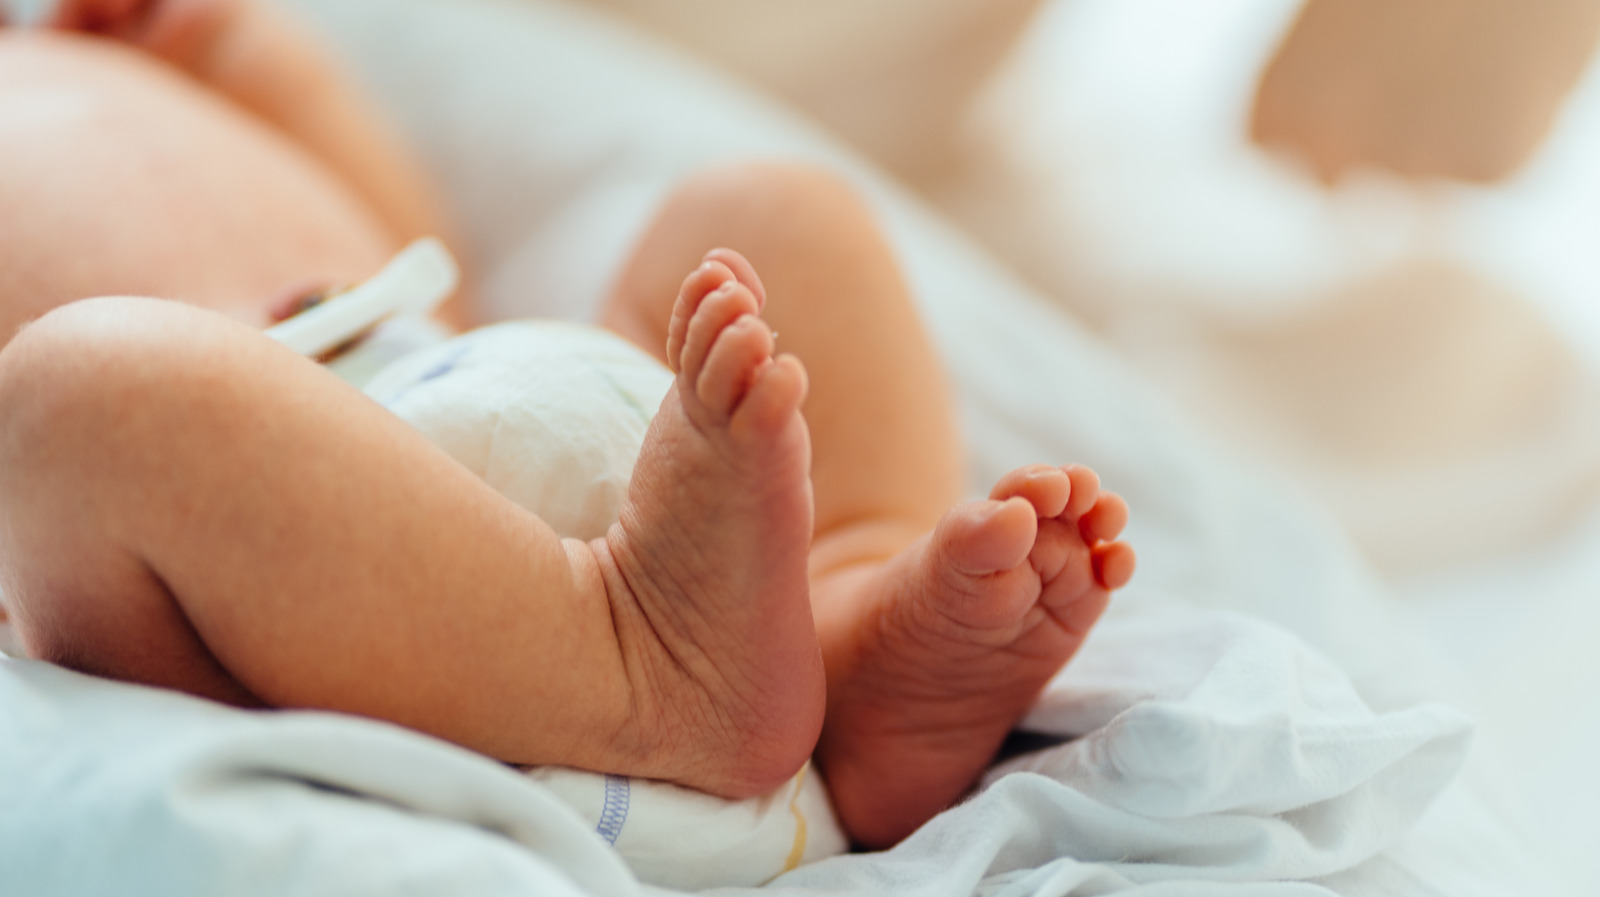 Researchers discover that infants born via C-section may react differently to common vaccines